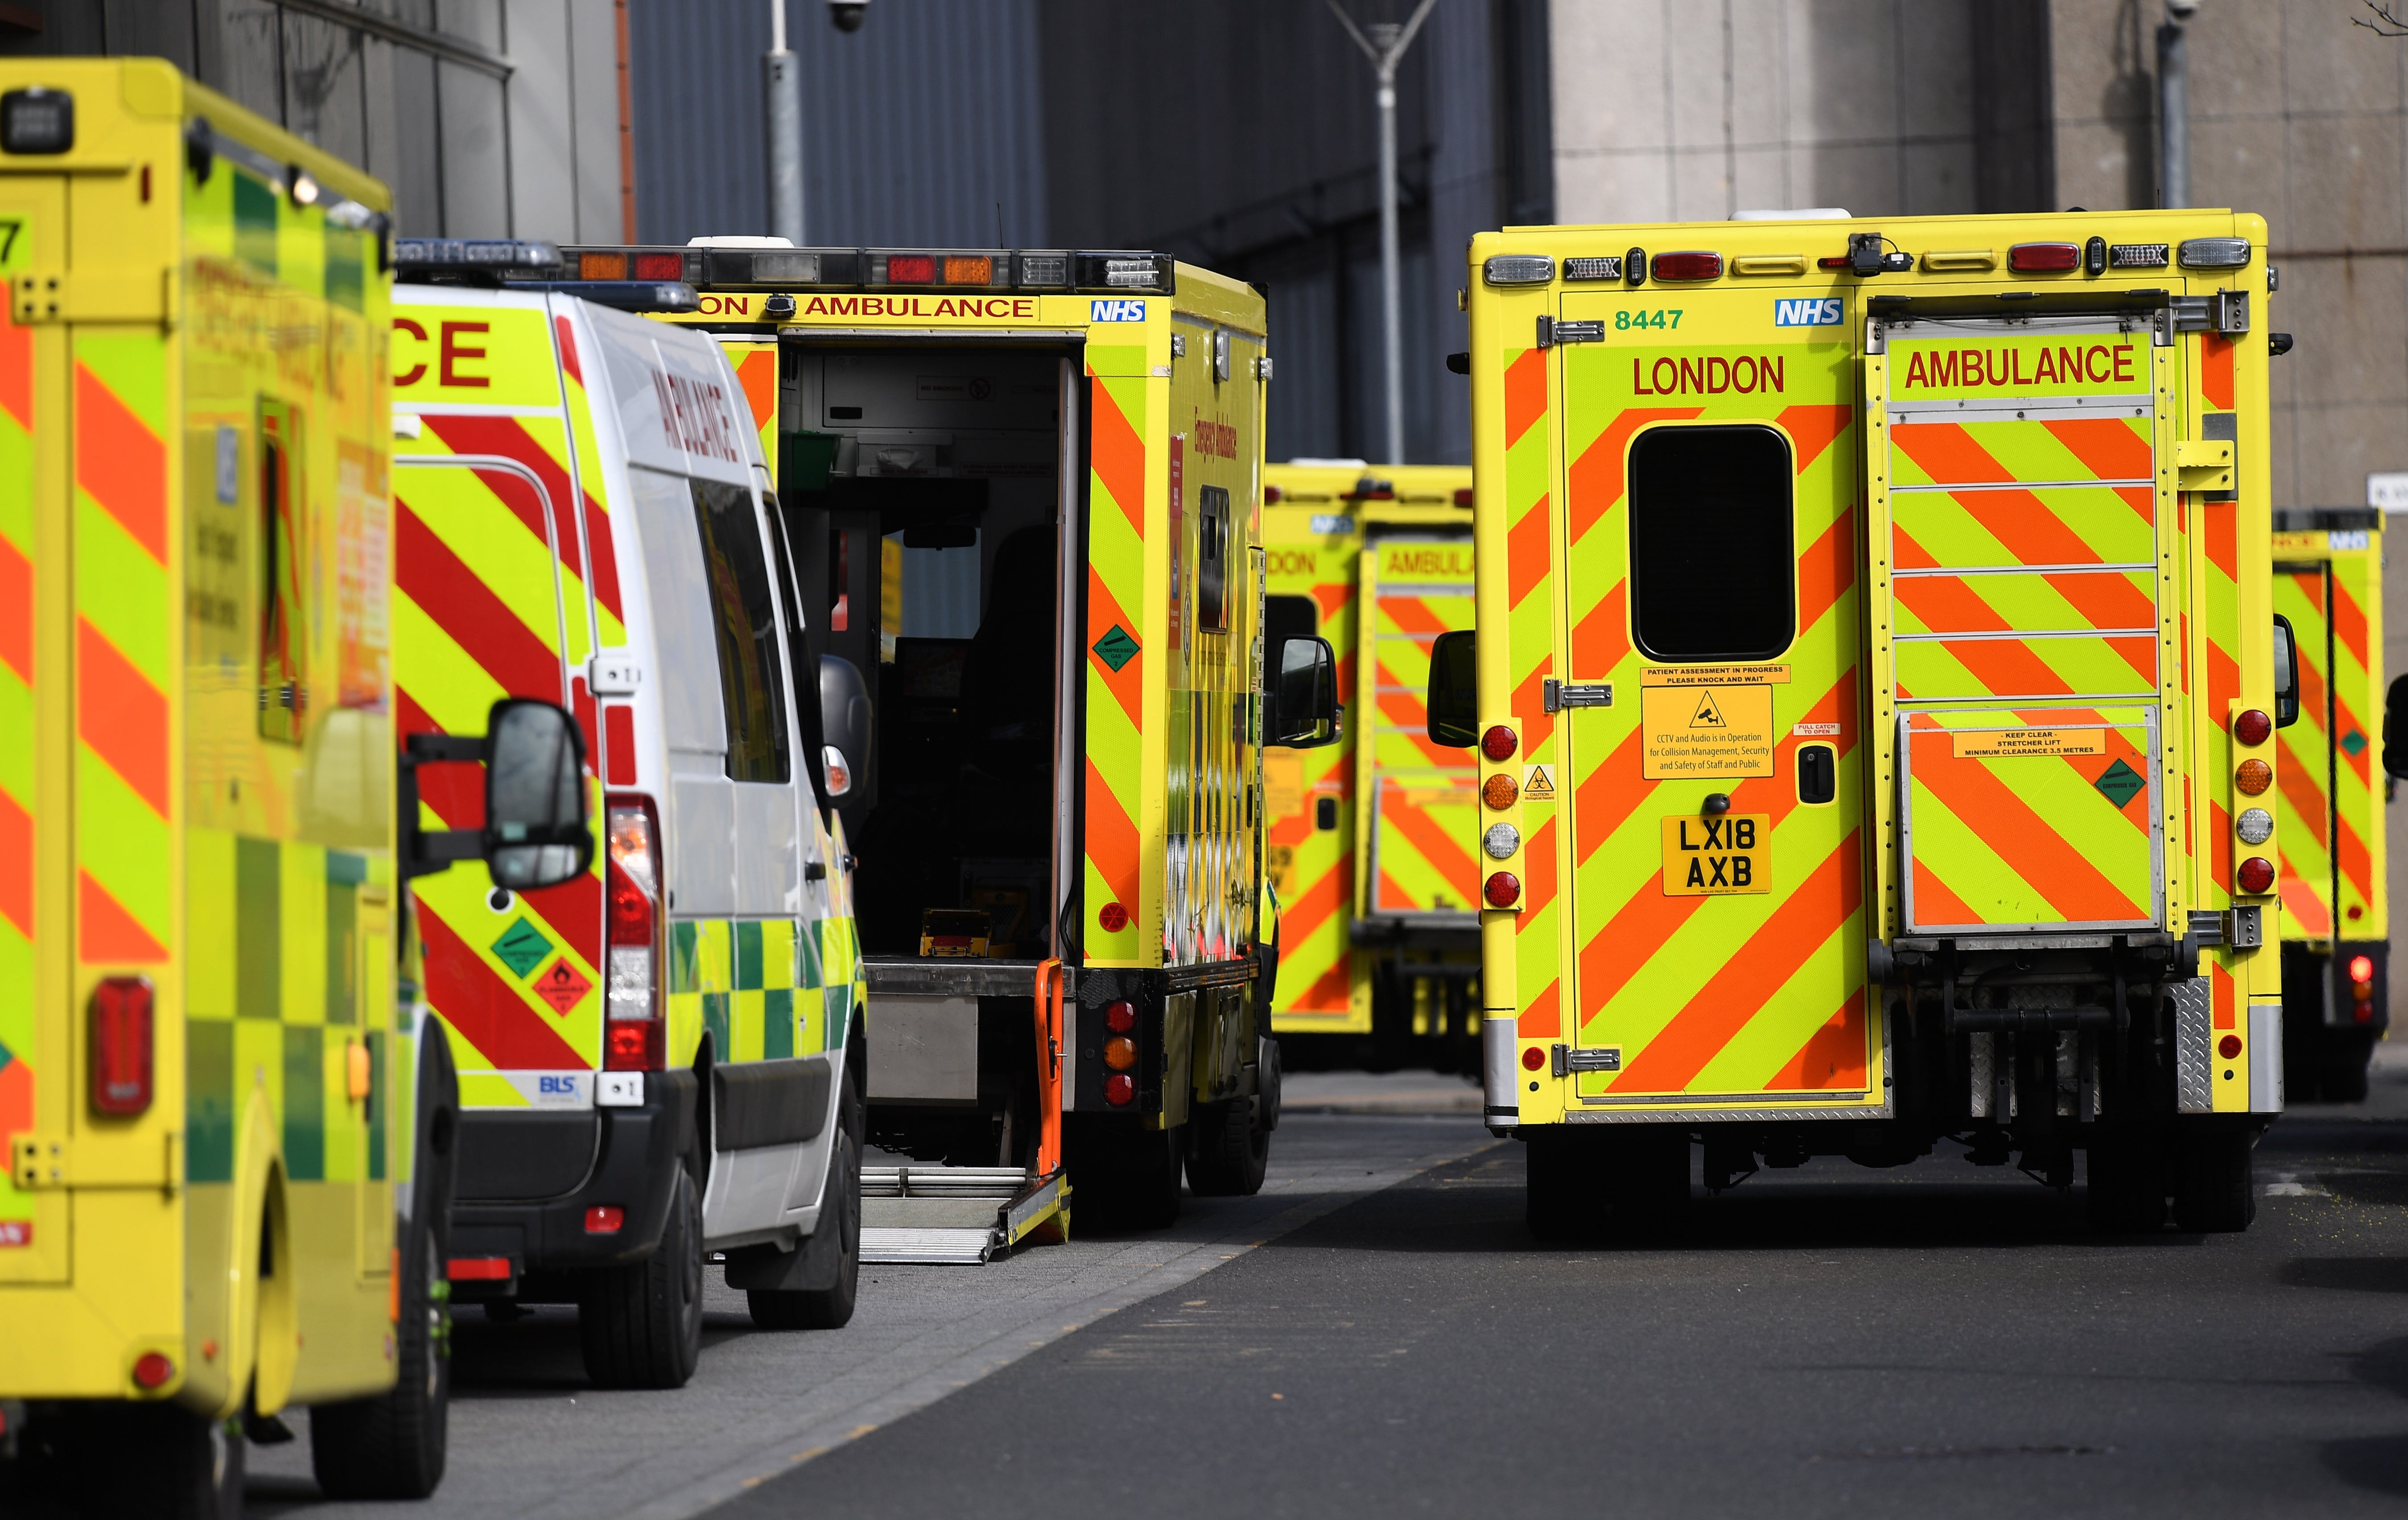 Ambulance crisis forcing police to take patients to hospital